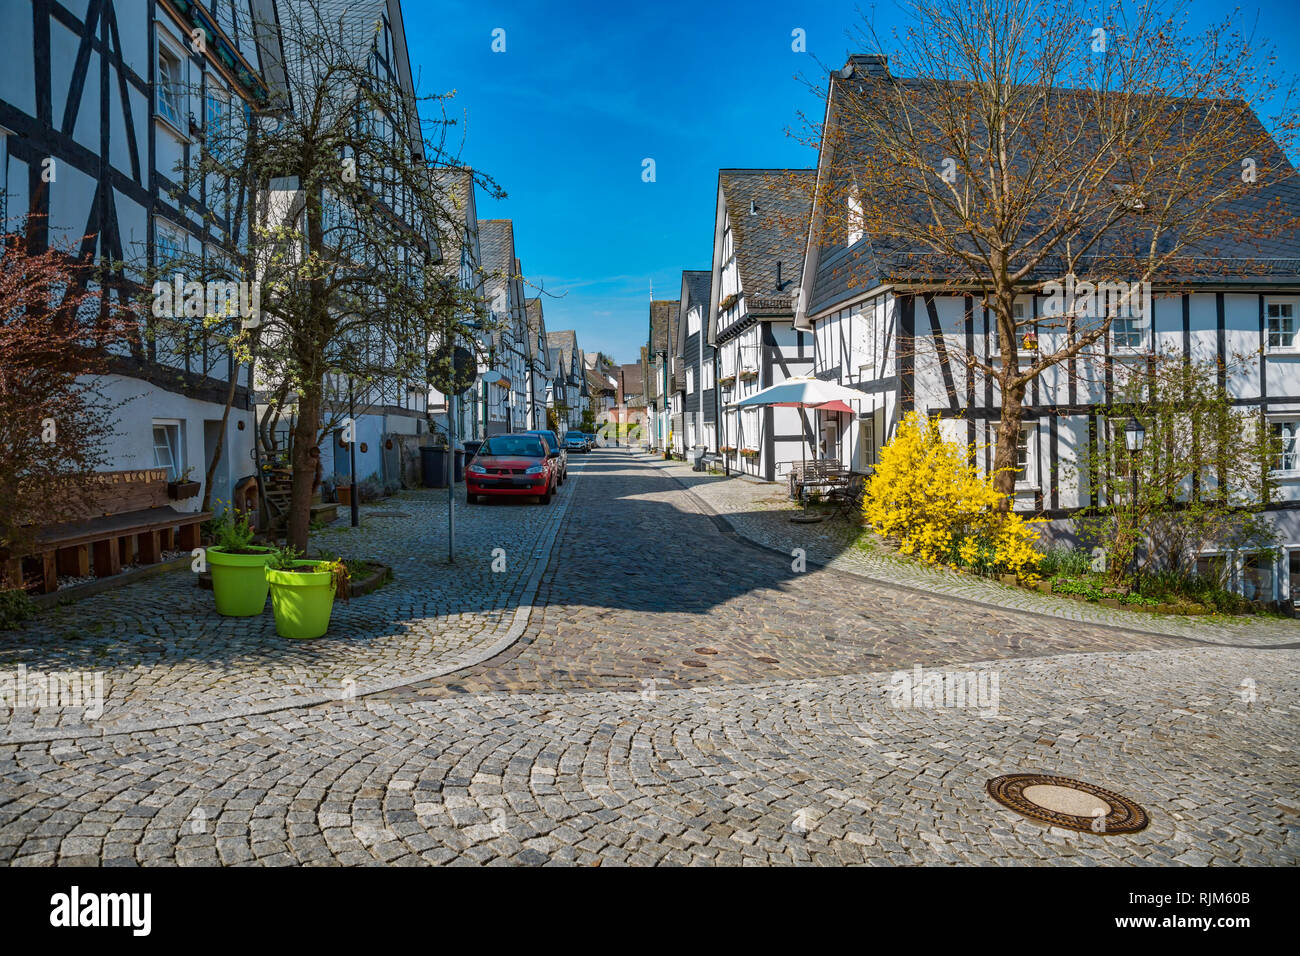 Freudenberg in NRW with old half-timbered houses in spring Stock Photo